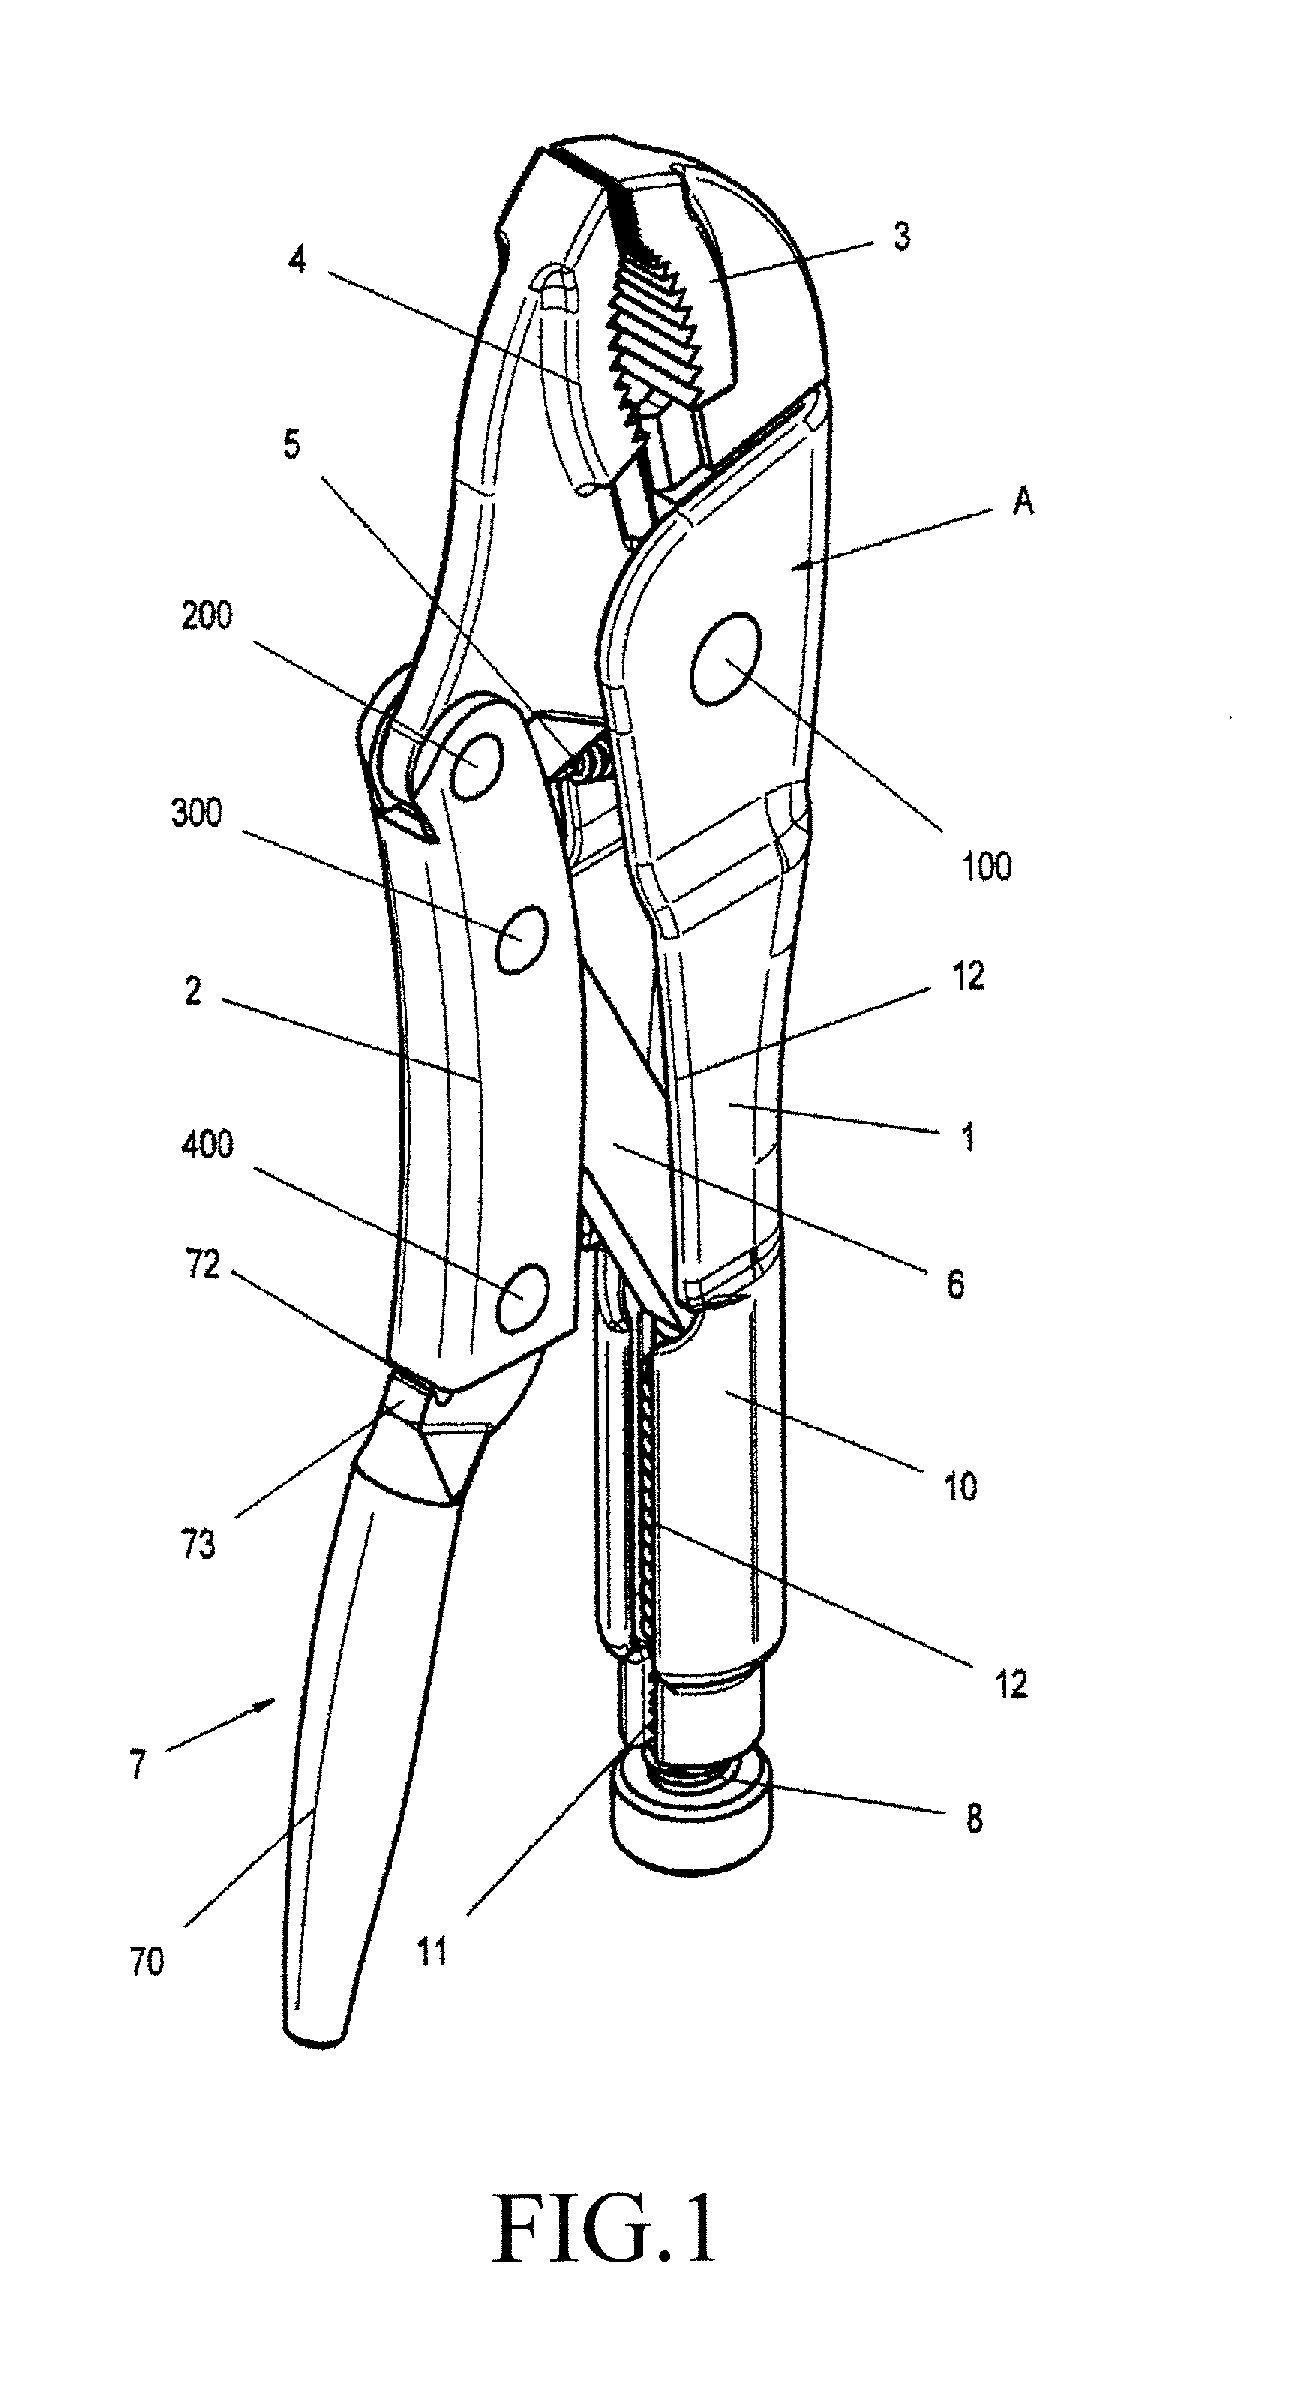 Simple structure of locking pliers for releasing and opening handles and jaws through fast and direct pulling